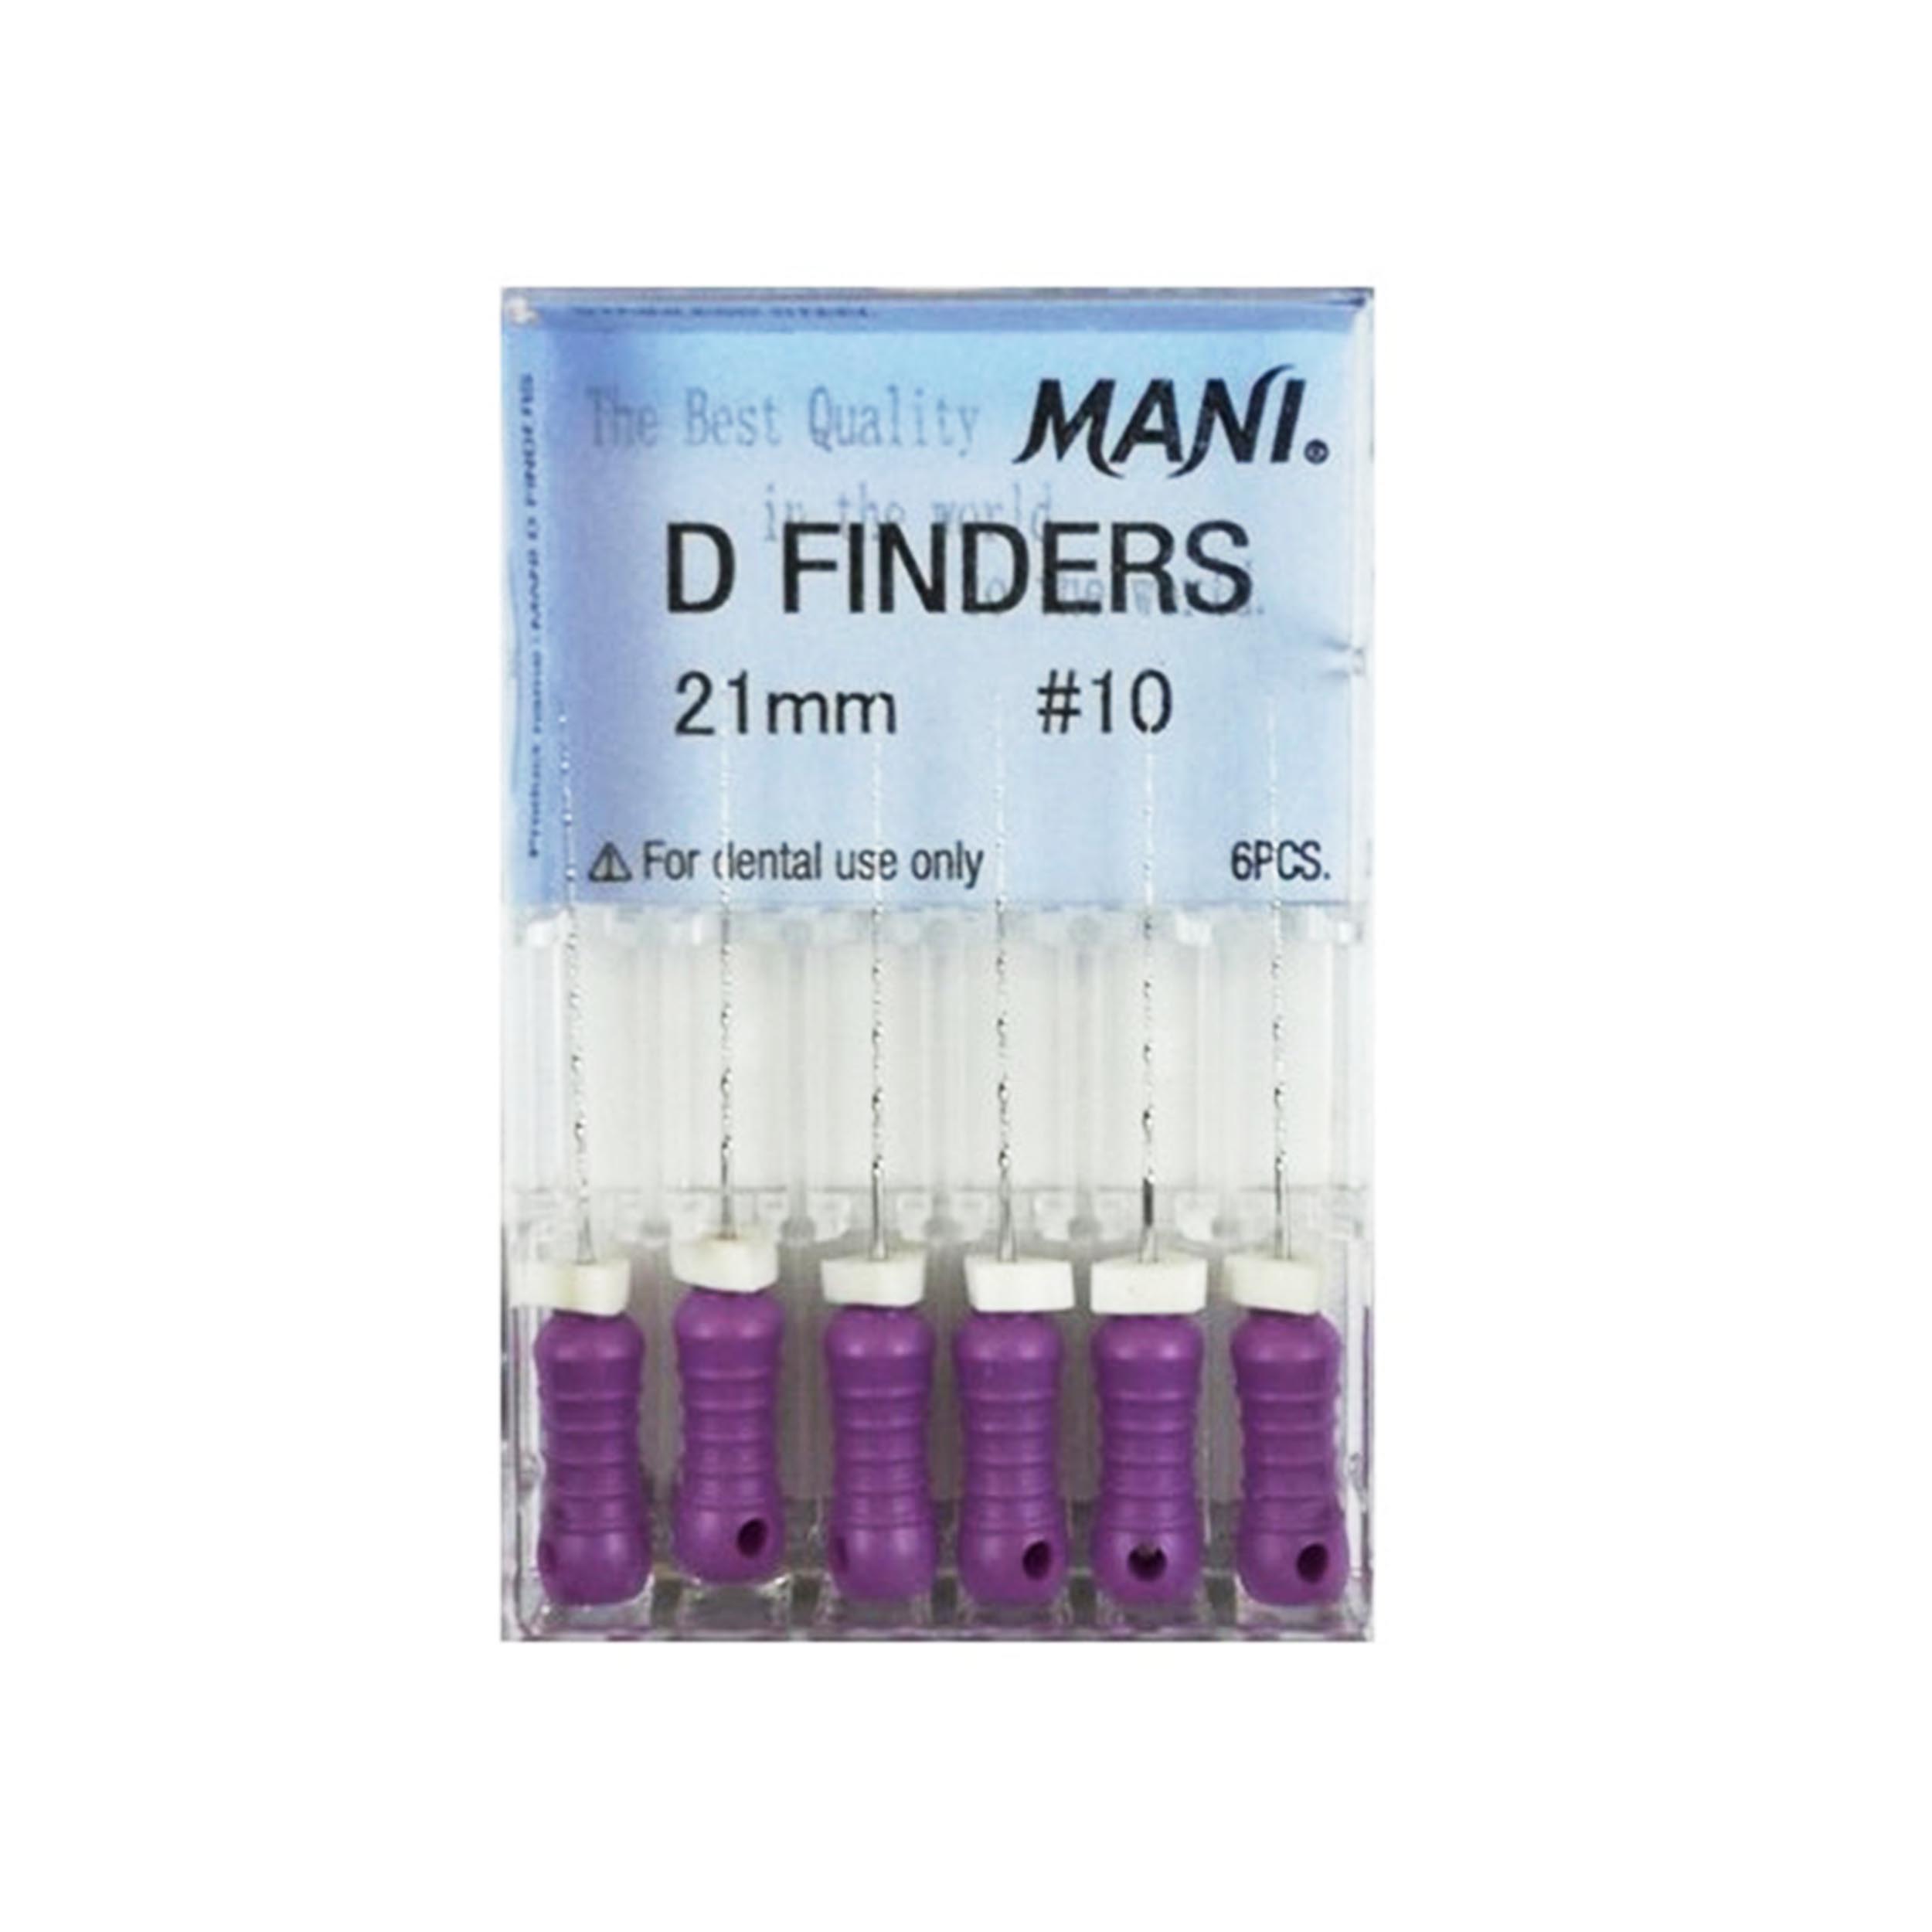 Mani D Finder Root Canal Files 15 (25mm)